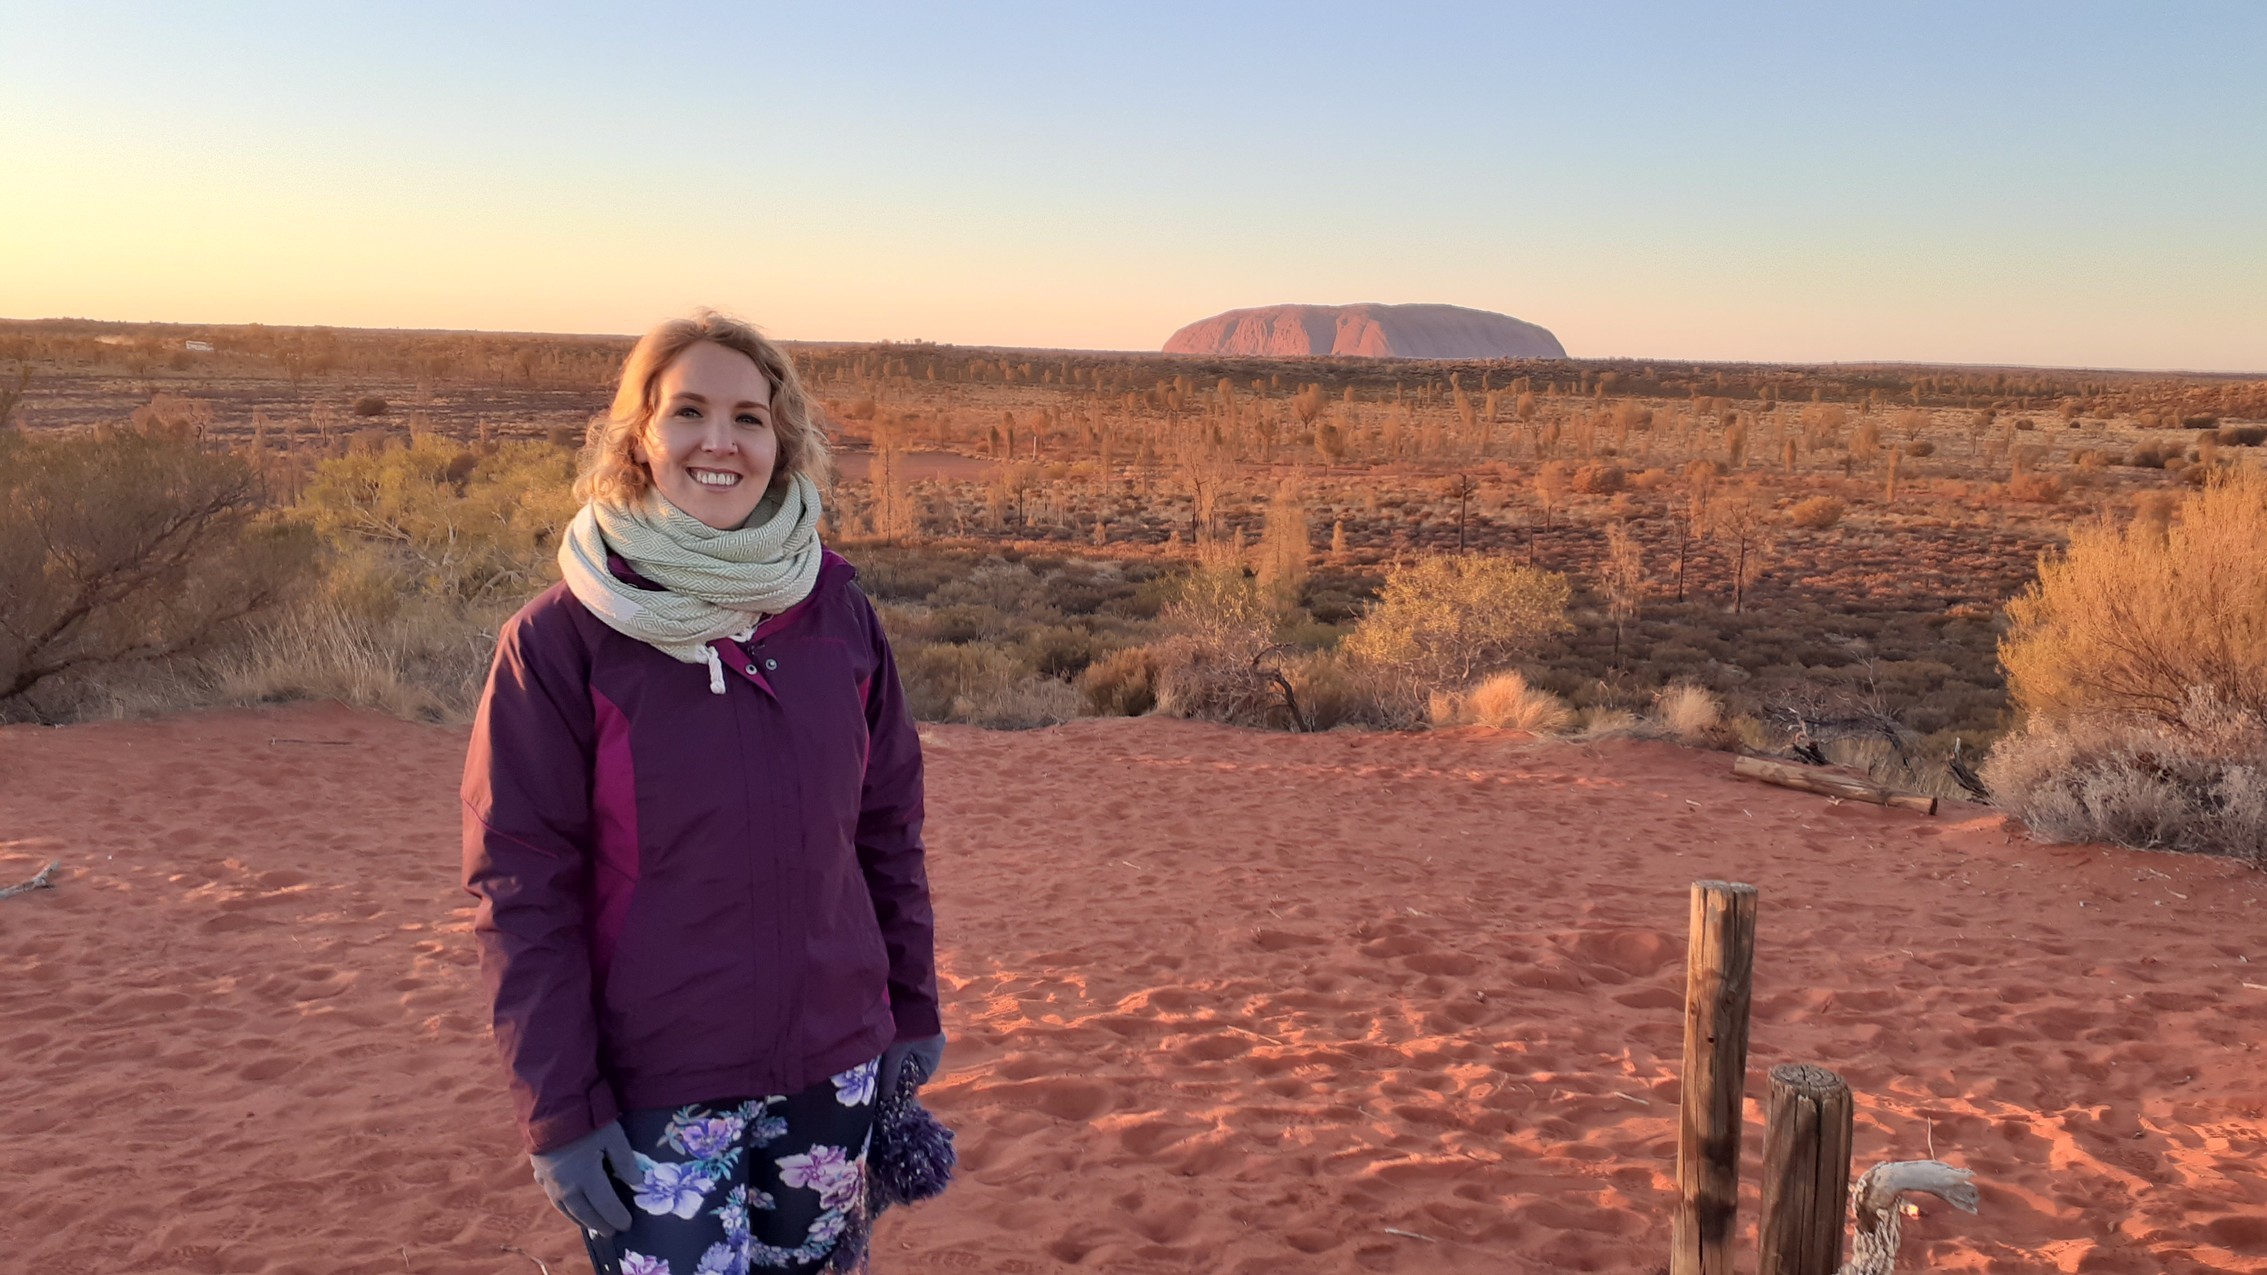 Sarah Renouf travelled in Australia, including to the famous Uluru landmark, before starting her job with the Red Cross (28480299)